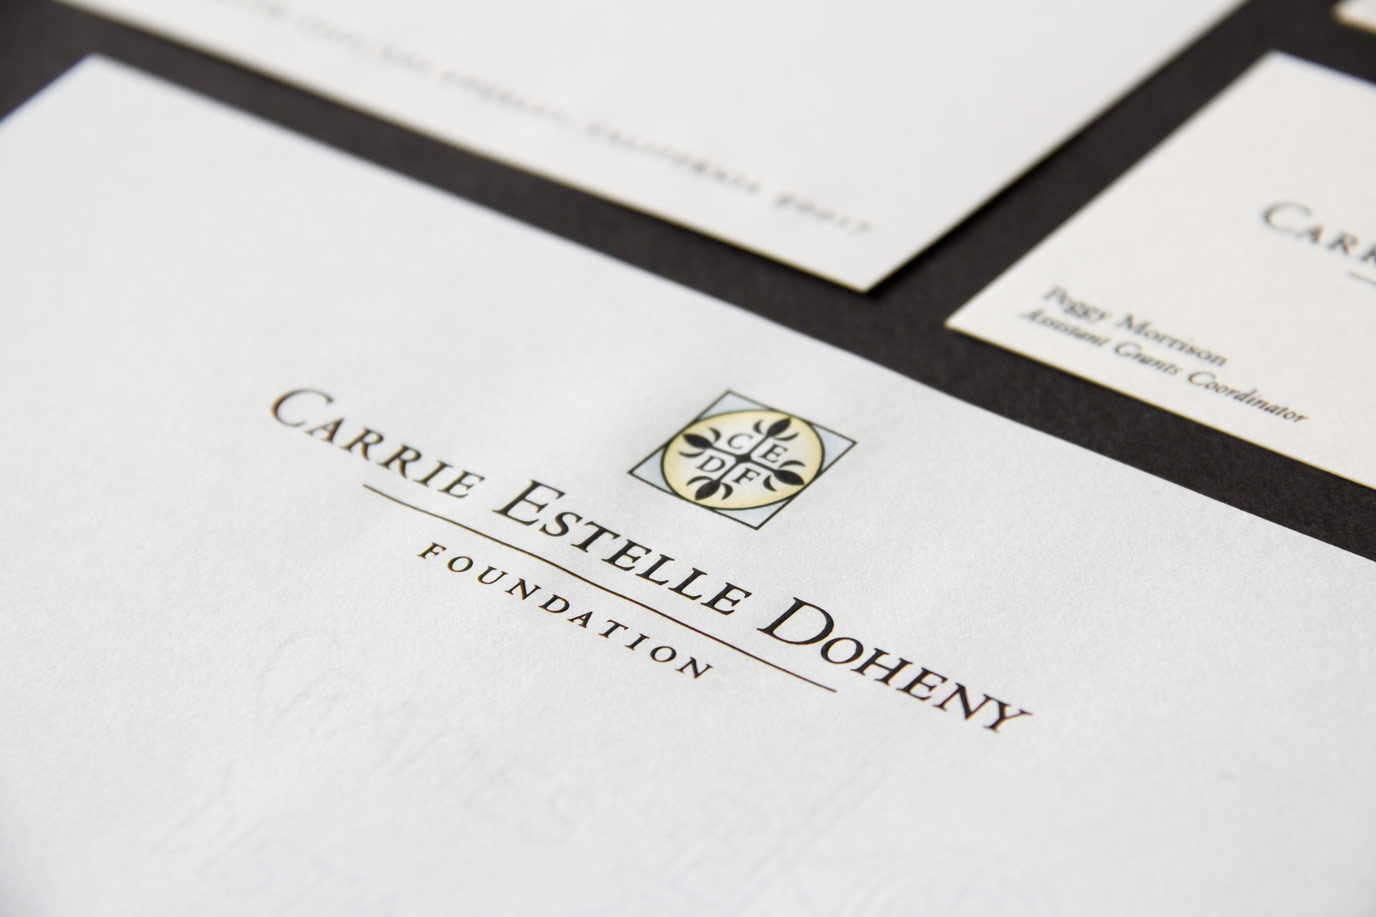 Carrie Estelle Doheny Foundation stationery